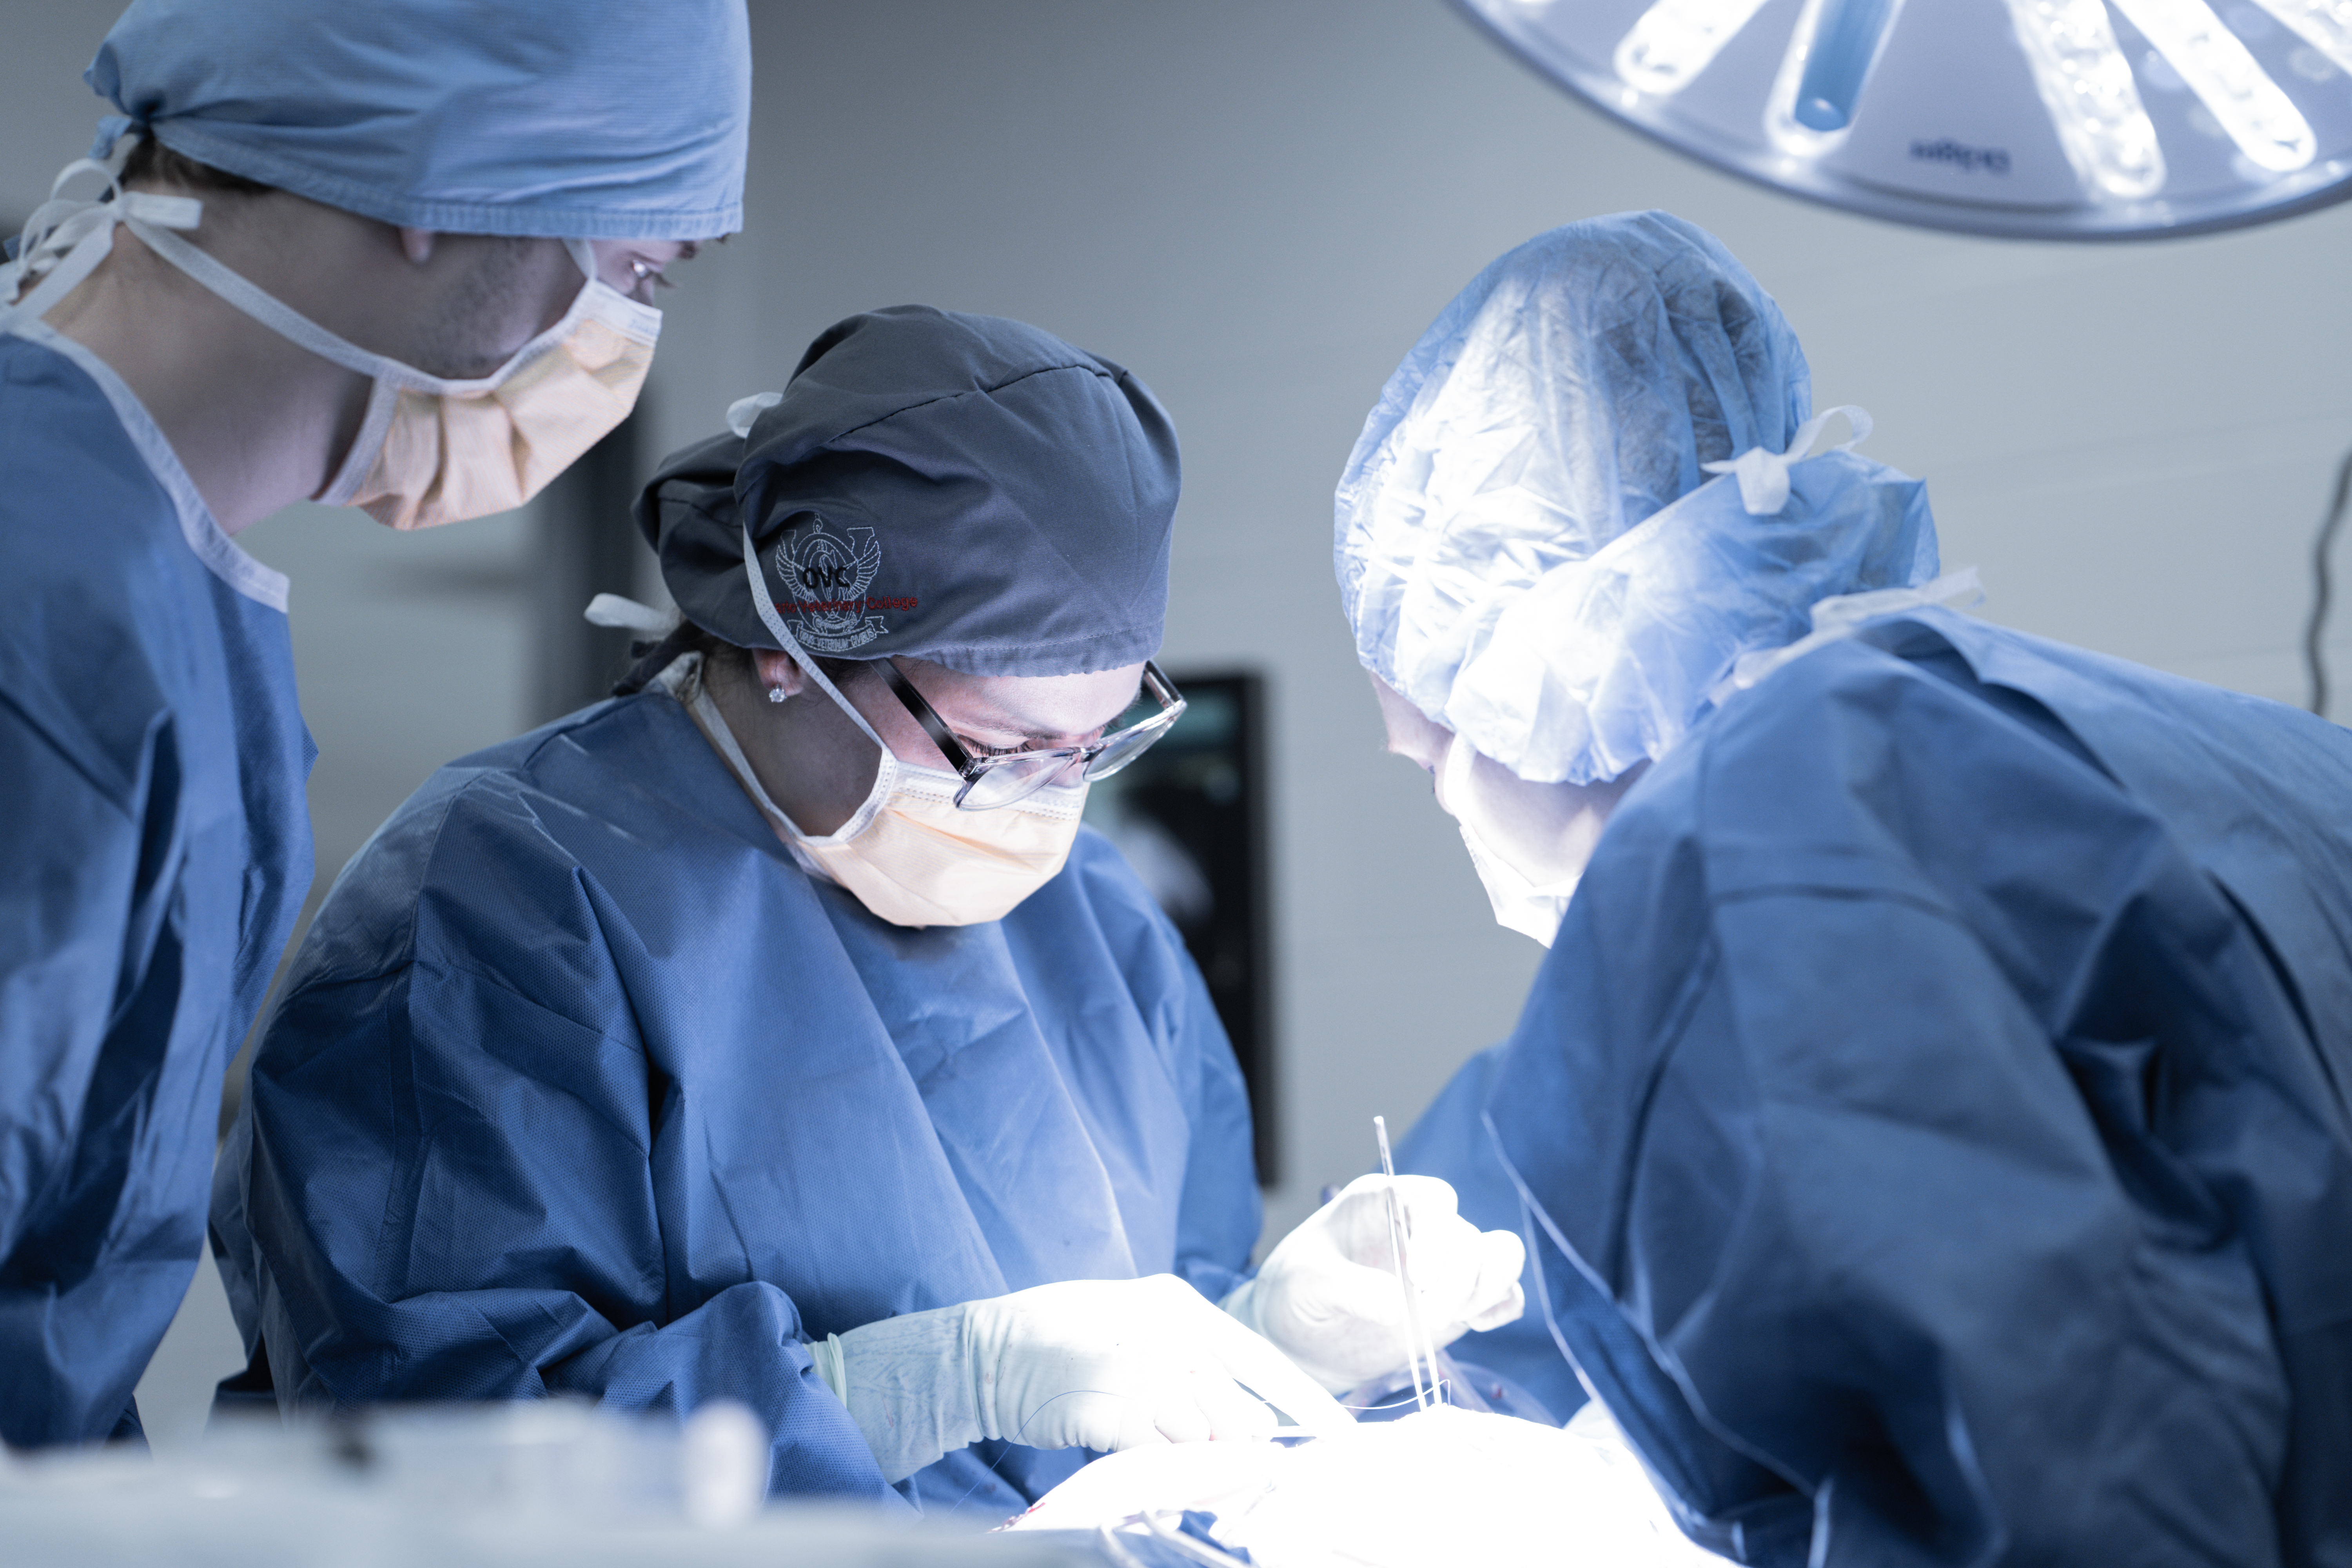 Veterinary team performs surgery in an operating room at the OVC Health Sciences Centre.